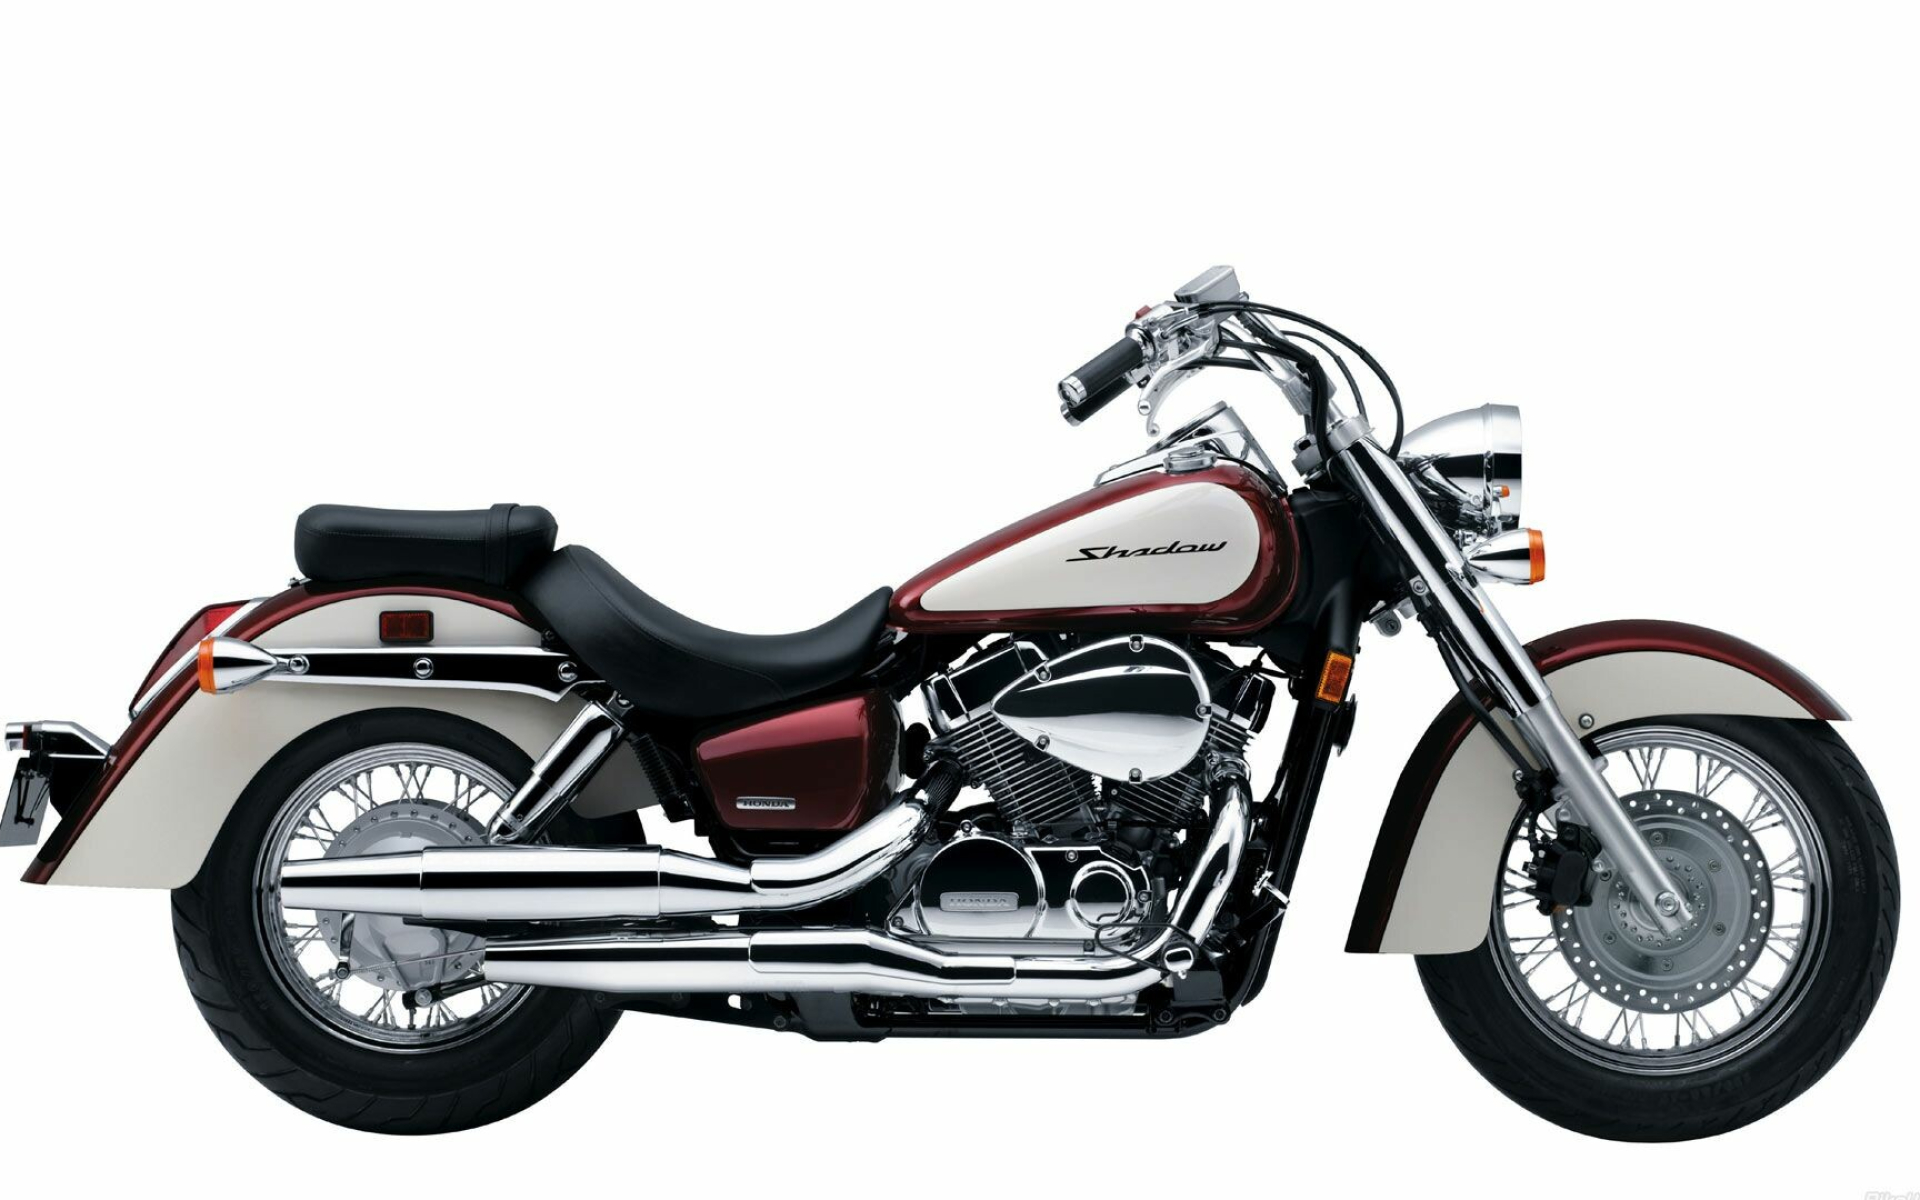 Honda Shadow: A cruiser-type motorcycle, Made by Japanese company since 1983. 1920x1200 HD Wallpaper.